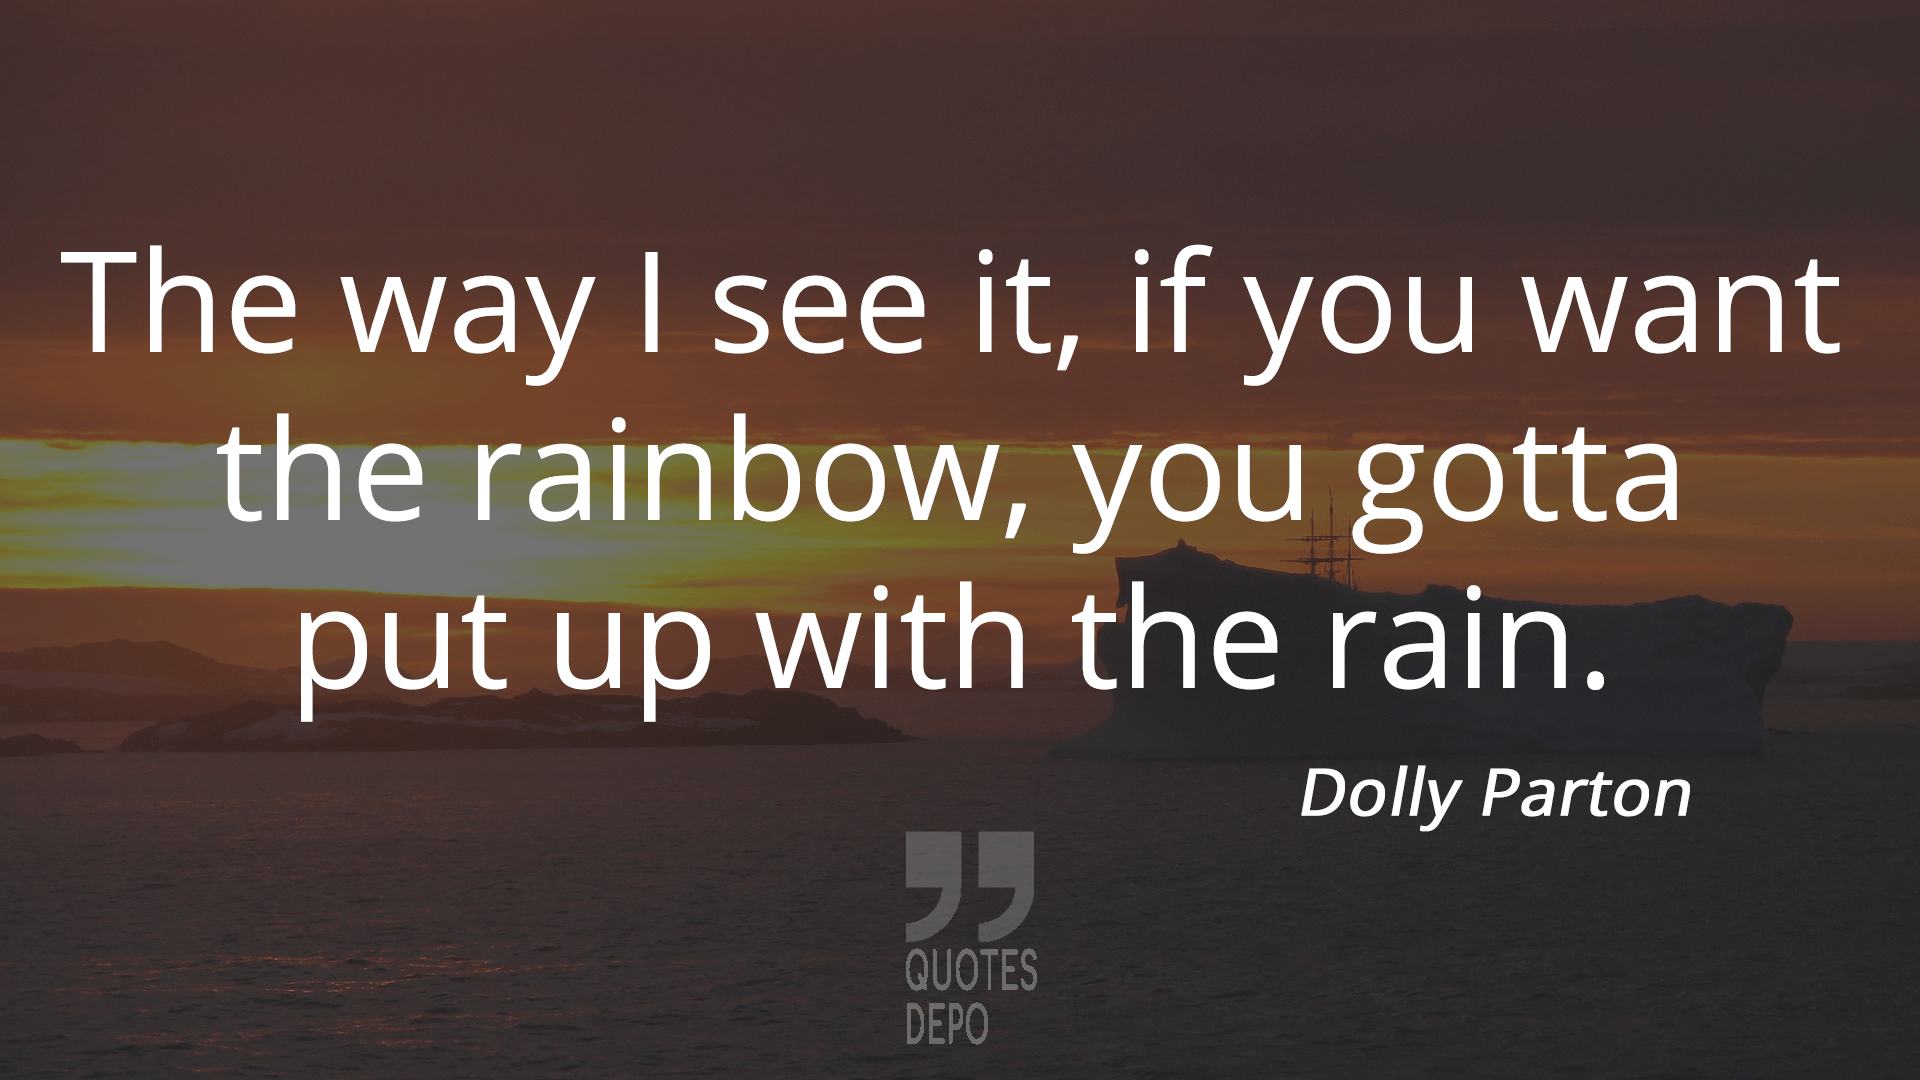 the way i see it - dolly parton quotes